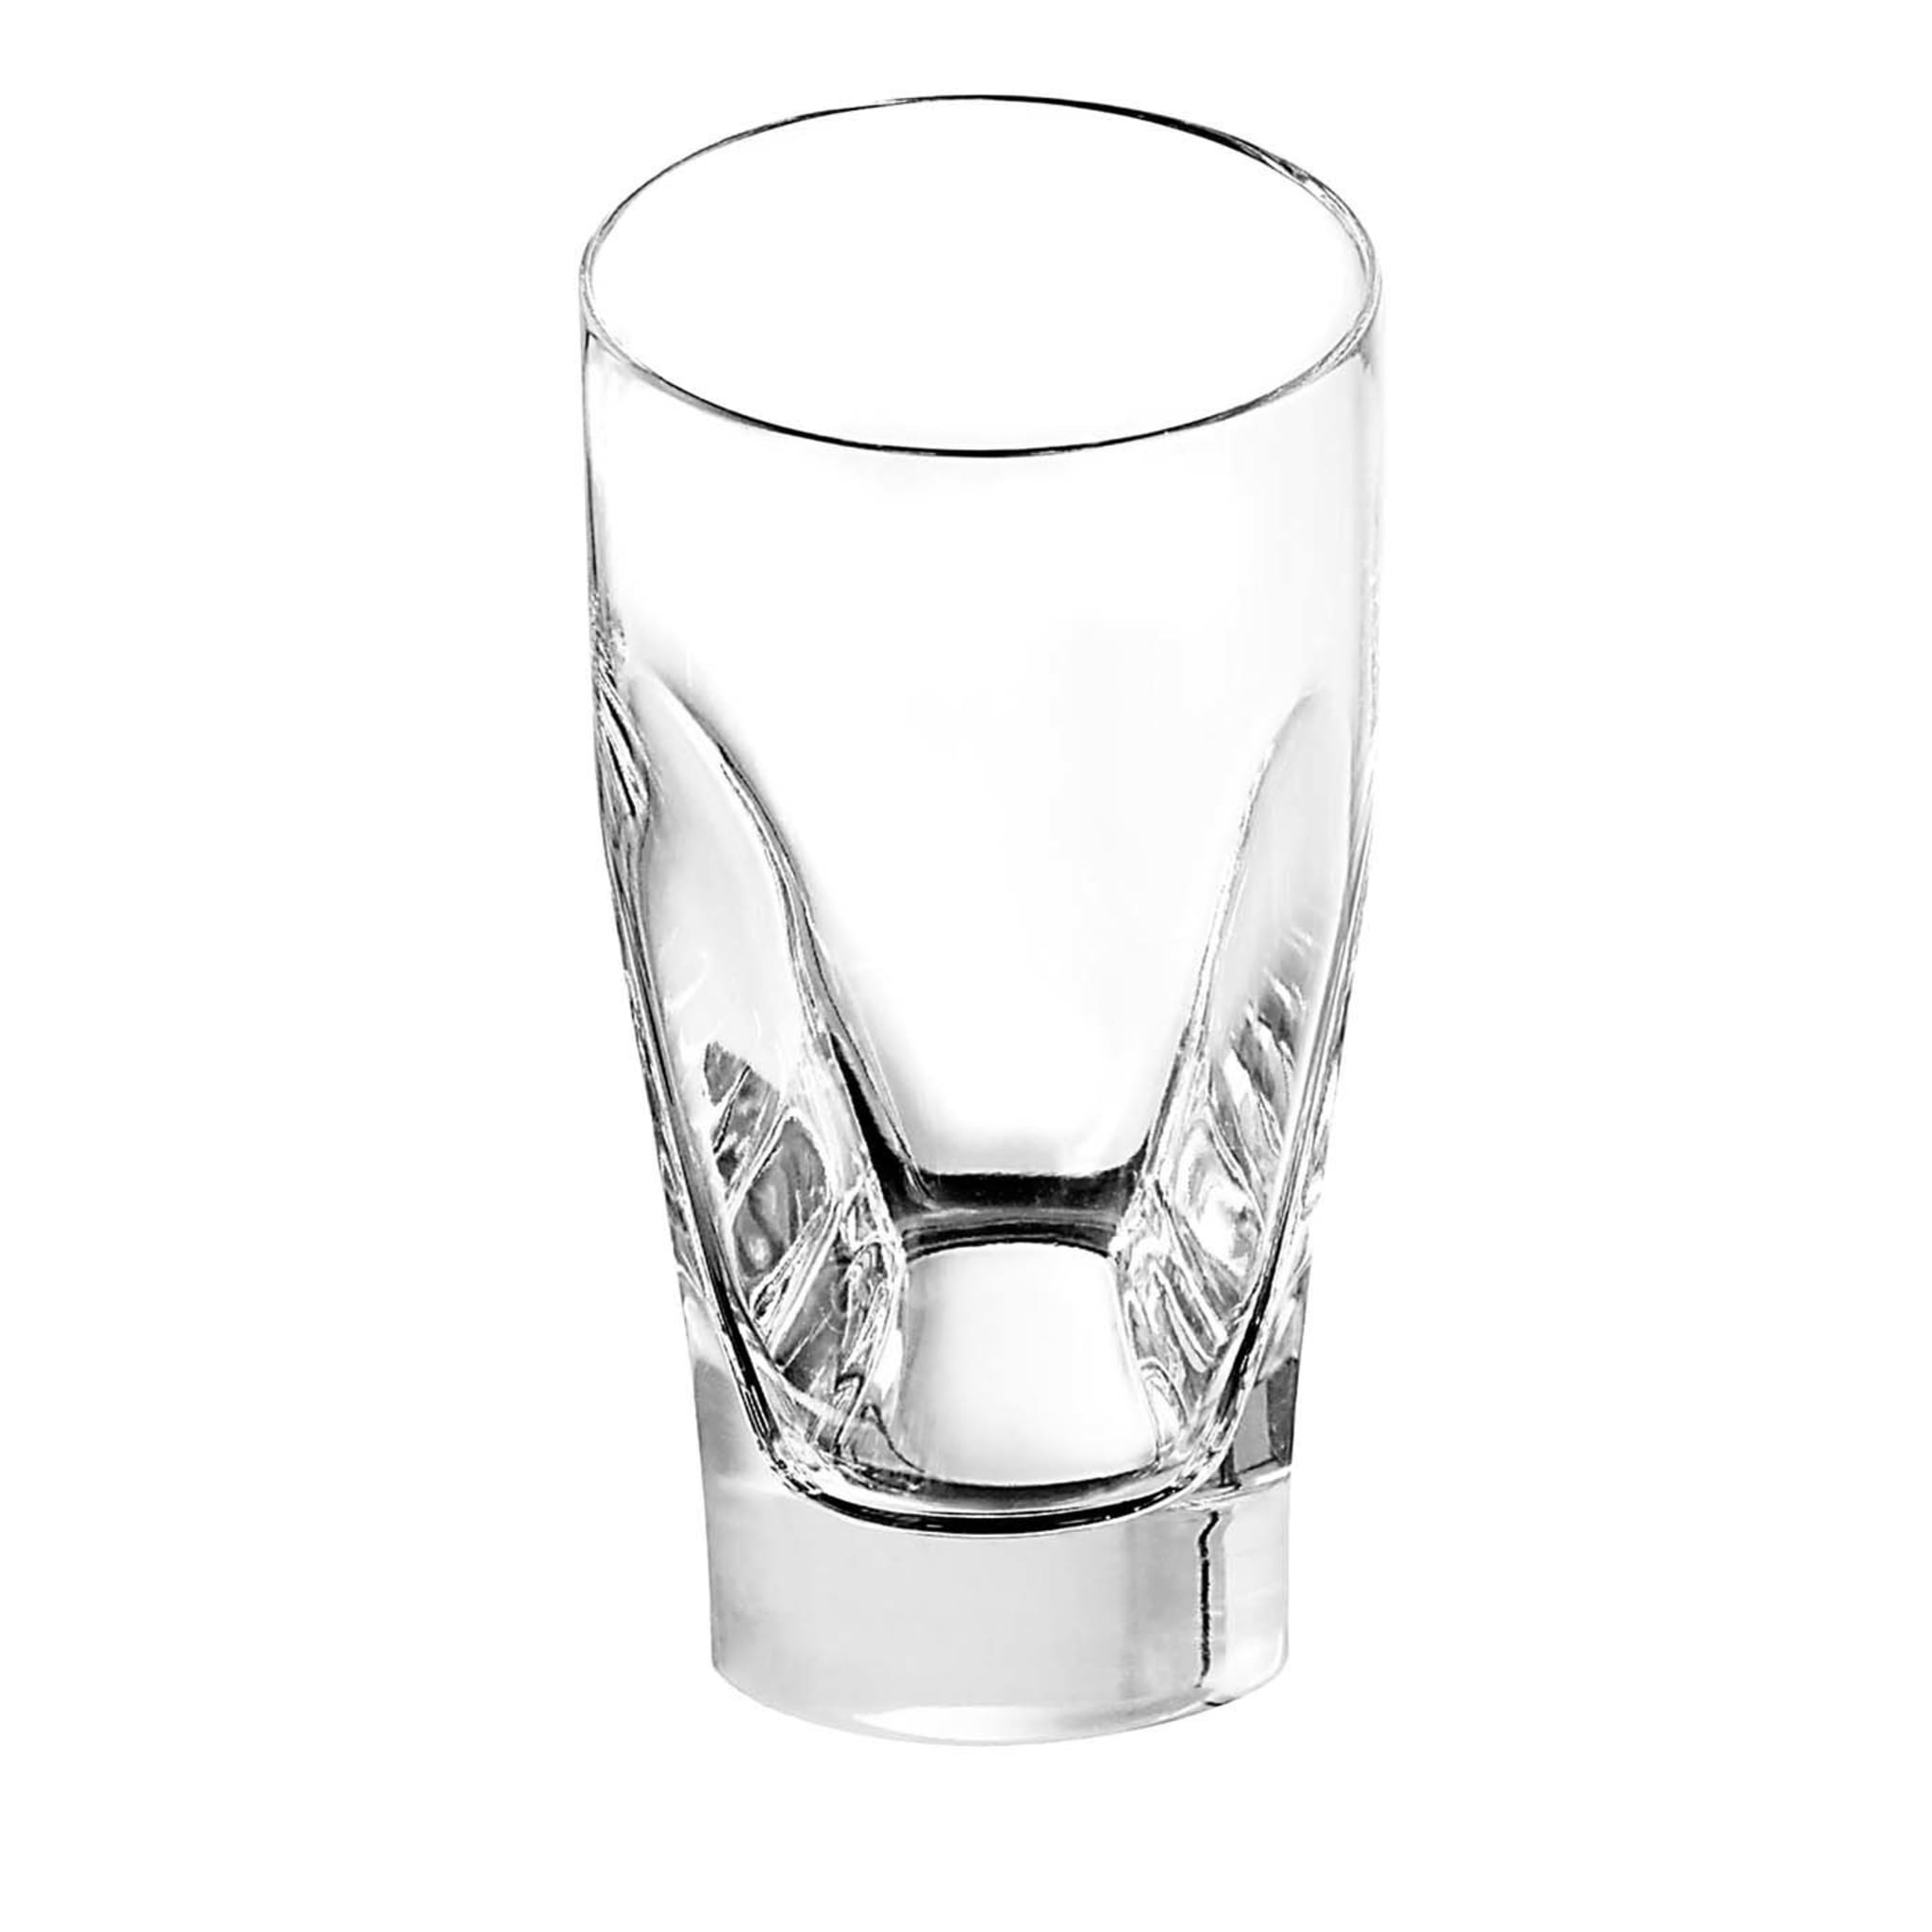 Clearance!Spree-Large Beer Glasses Cup Libbey Beer Glass Can